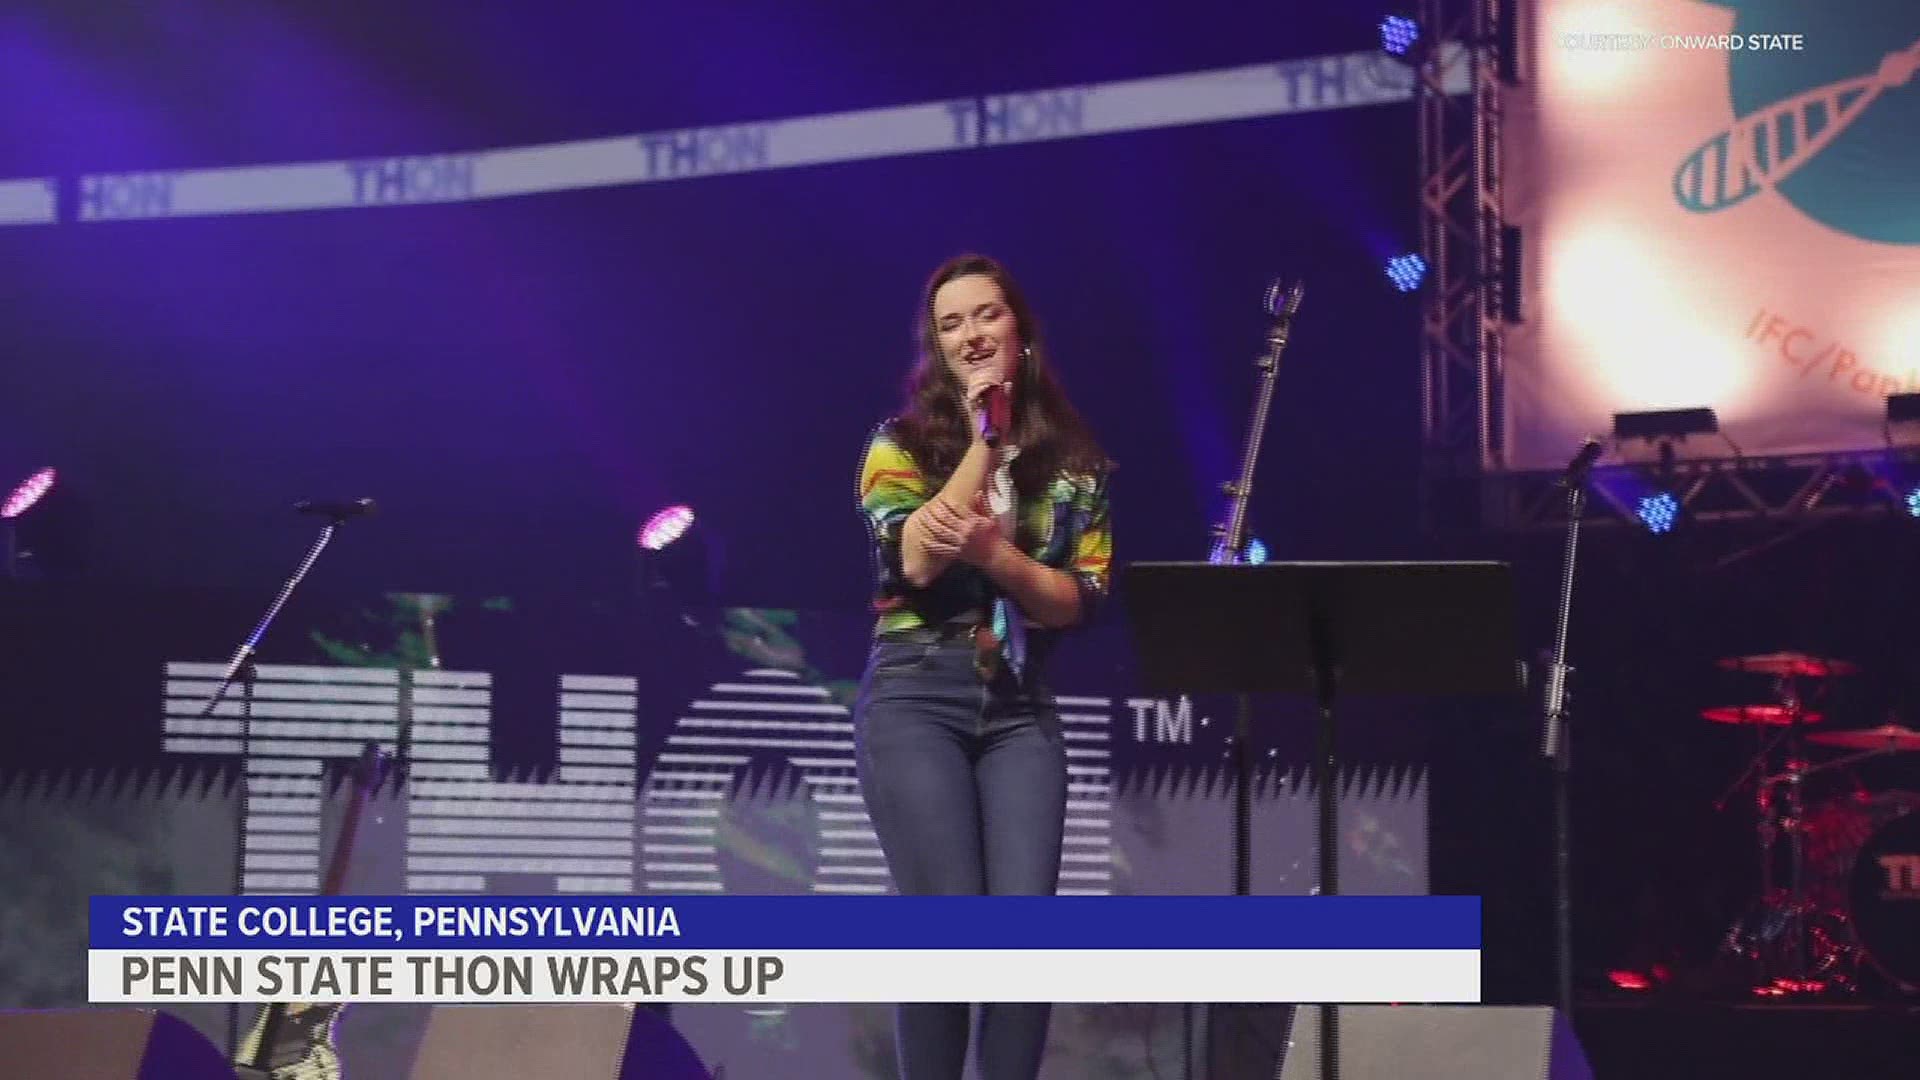 The Penn State THON marathon, which wrapped up Sunday, raised a total of $10,638,078.62 for the Four Diamonds Fund at Penn State Children’s Hospital.